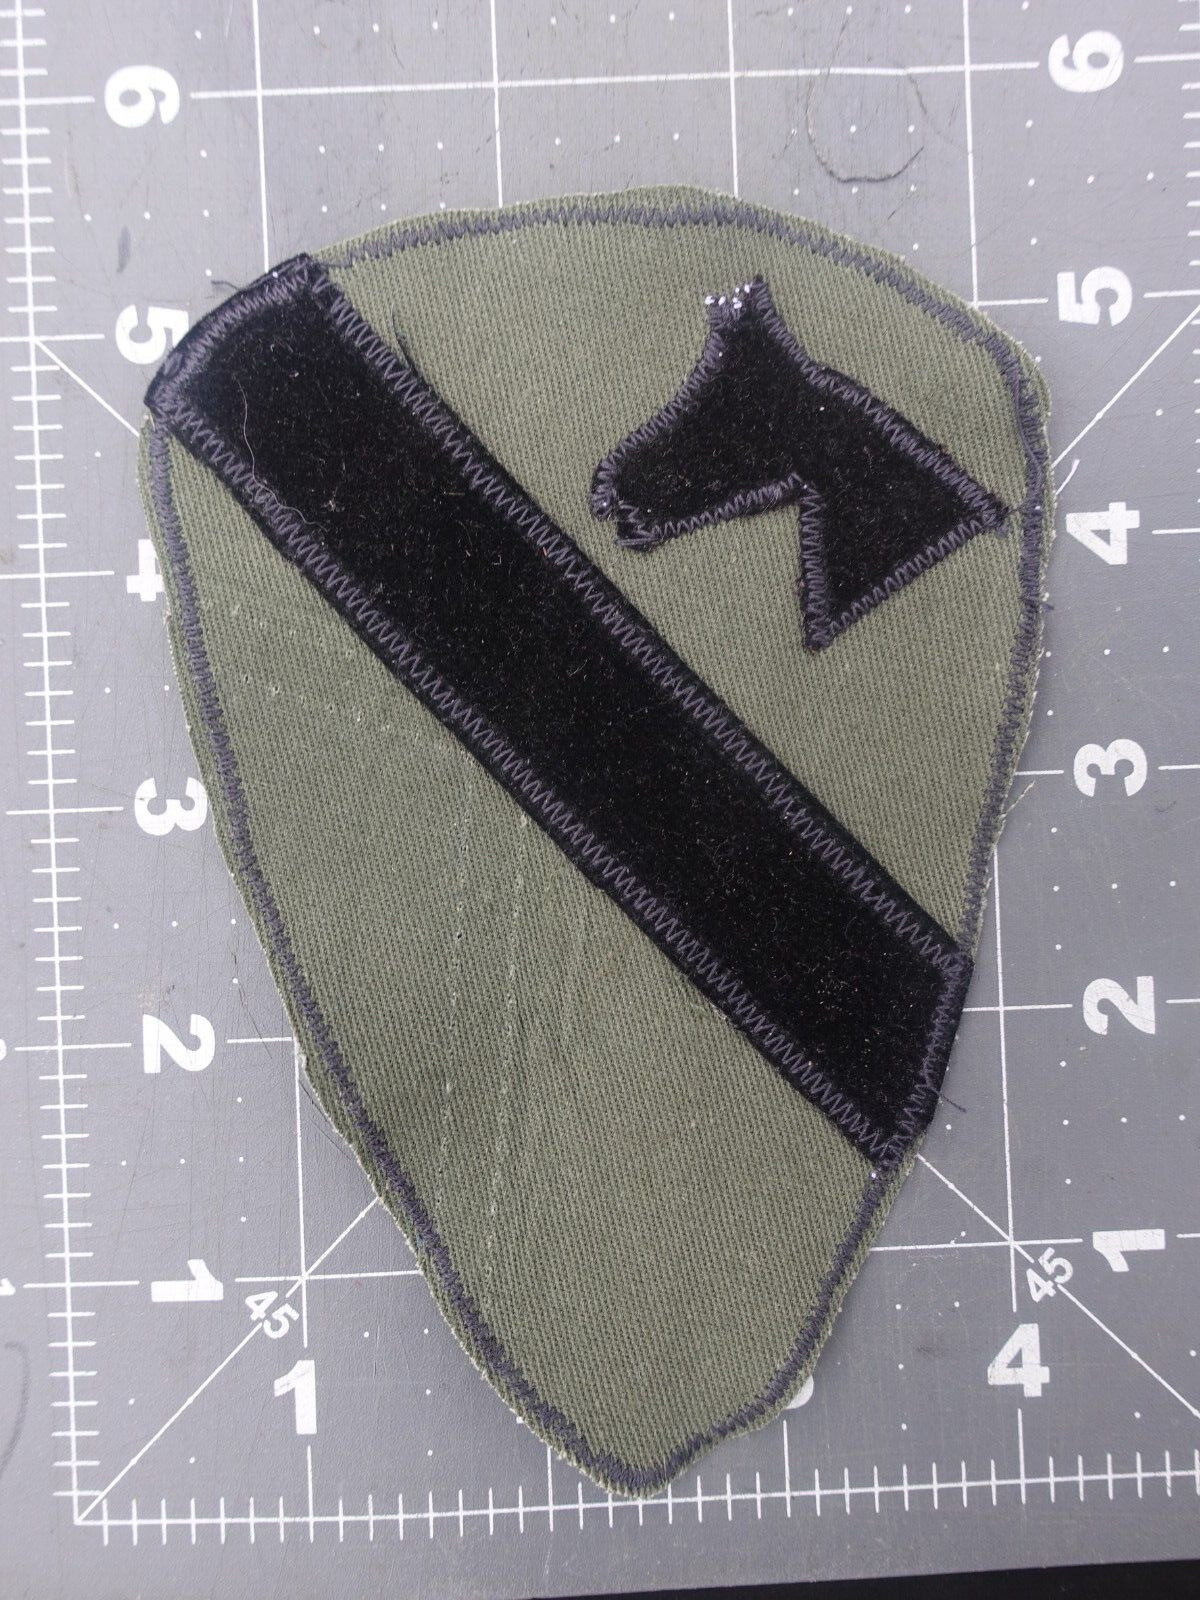 Vietnam Theater Made Style 1st Air Cav cavalry SSI Patch Black Velvet Subdued